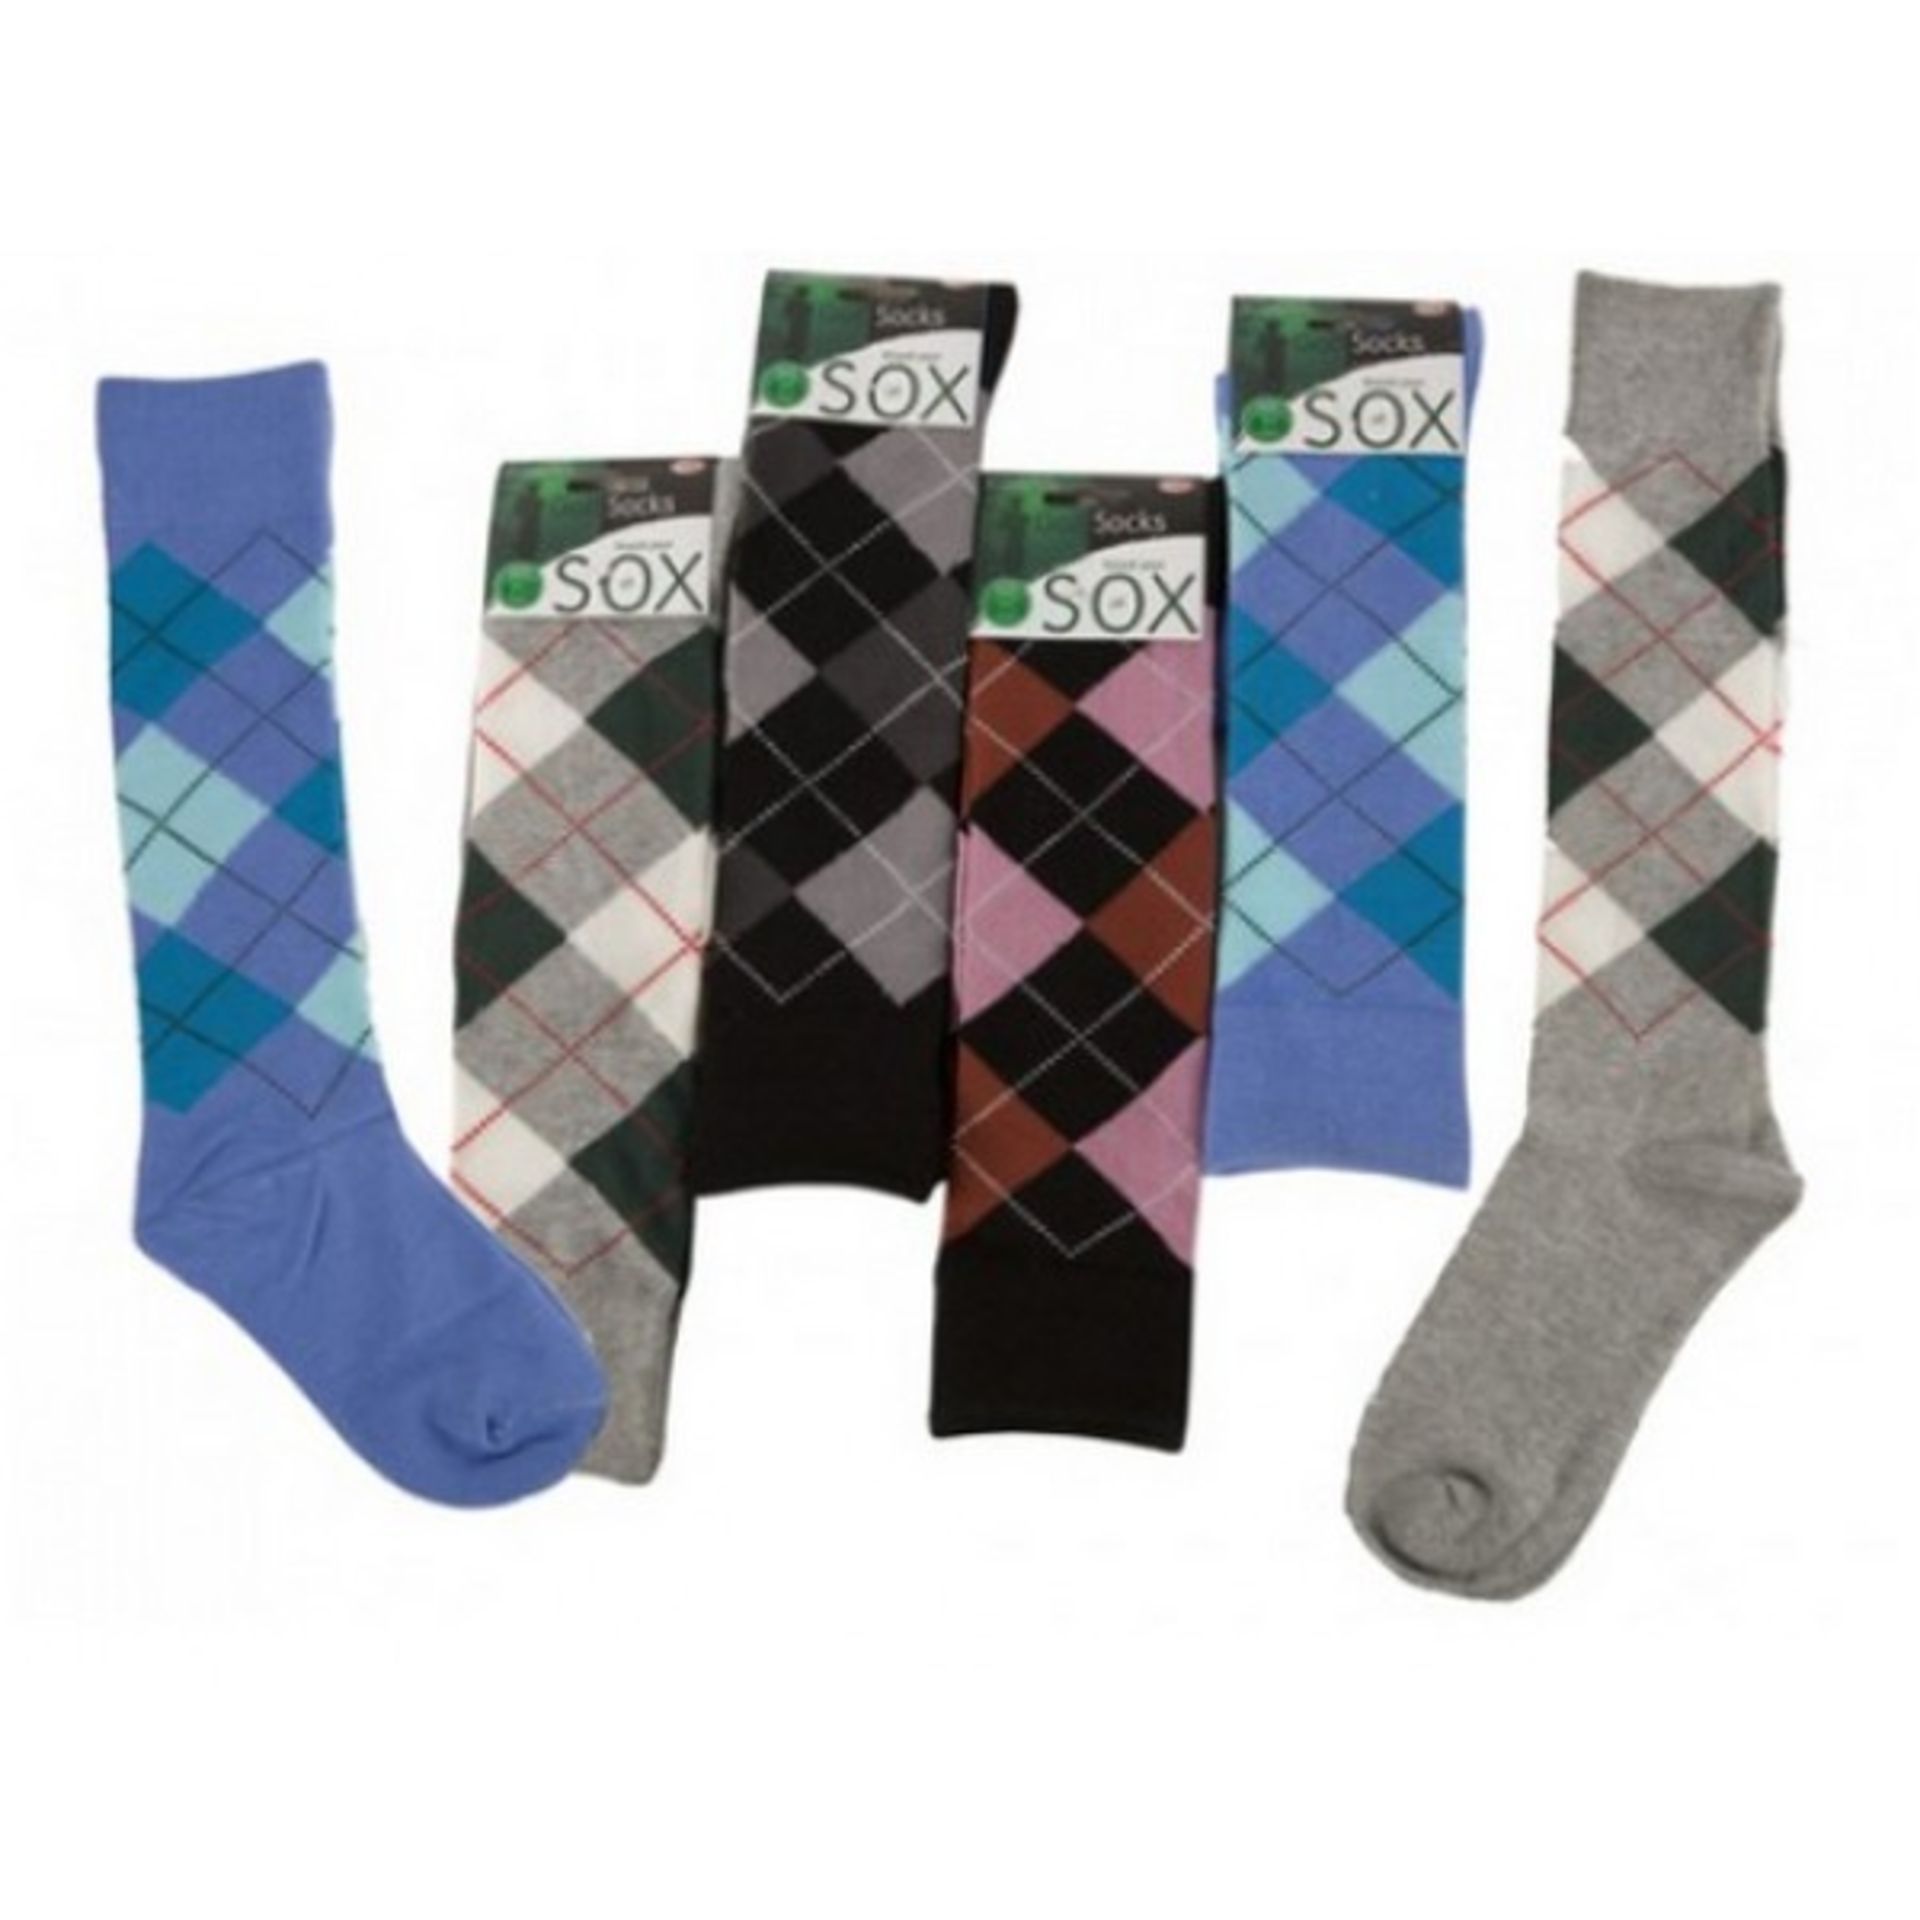 V Brand New Approx 16 Pairs Of Assorted Golf Socks (75percent cotton) Assorted Sizes